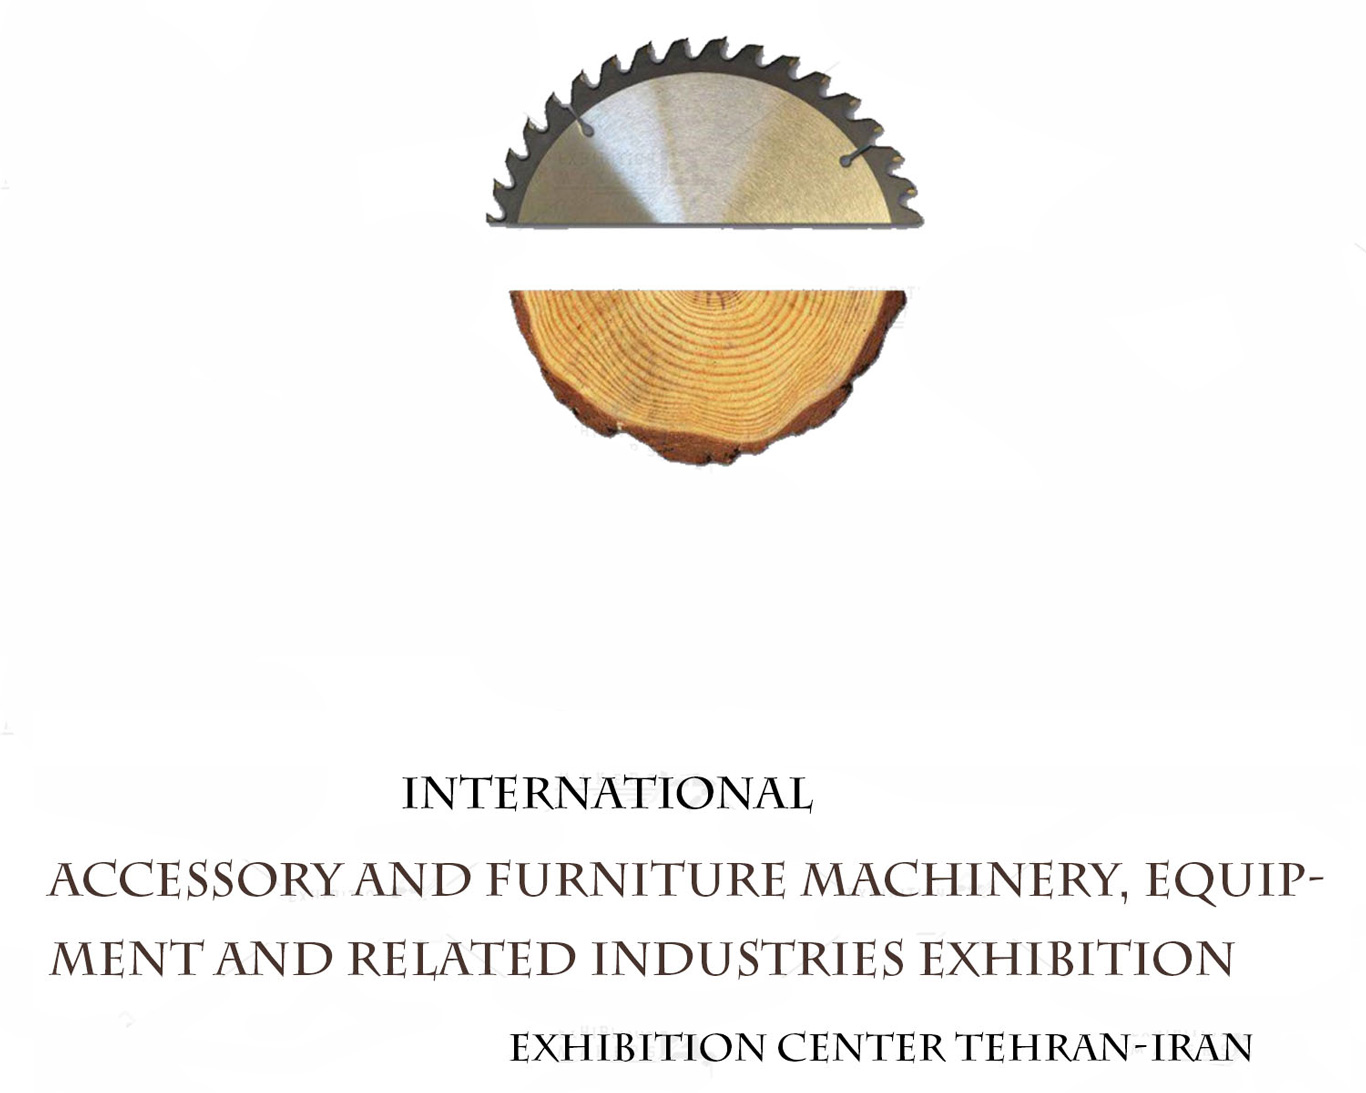 The 20th International Exhibition of Accessories, Machinery & Wood, Equipment and Related Industries